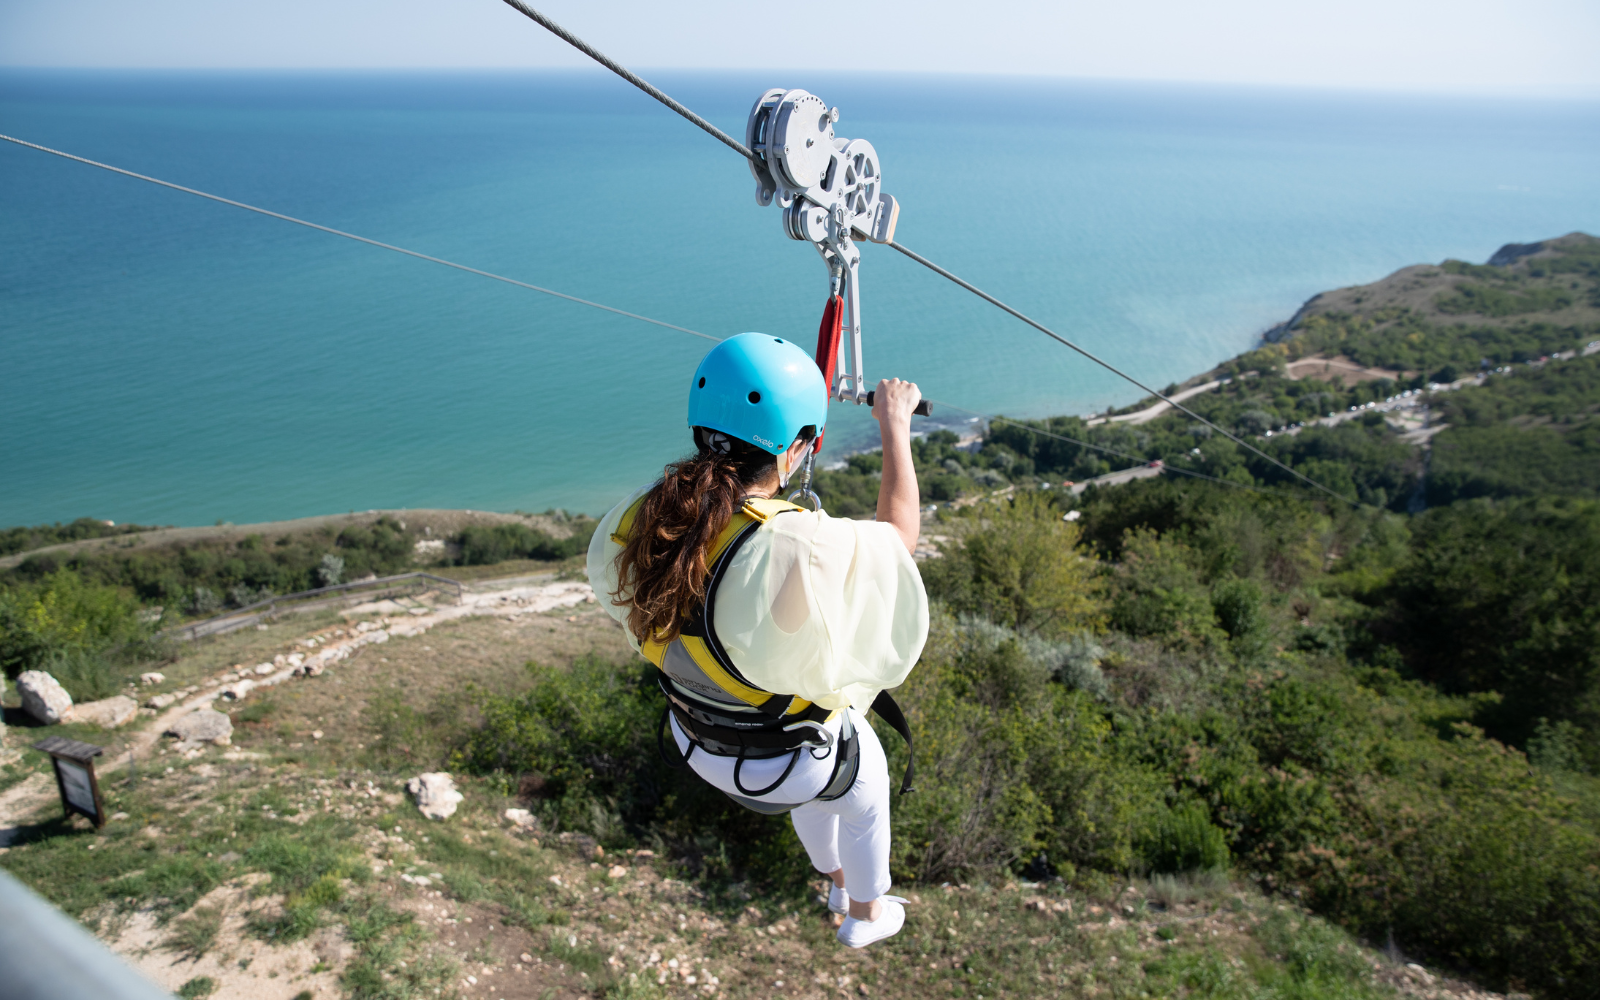 A girl ziplines from the top of a mountain to the sea, a high-altitude activity that should be avoided following a scuba dive